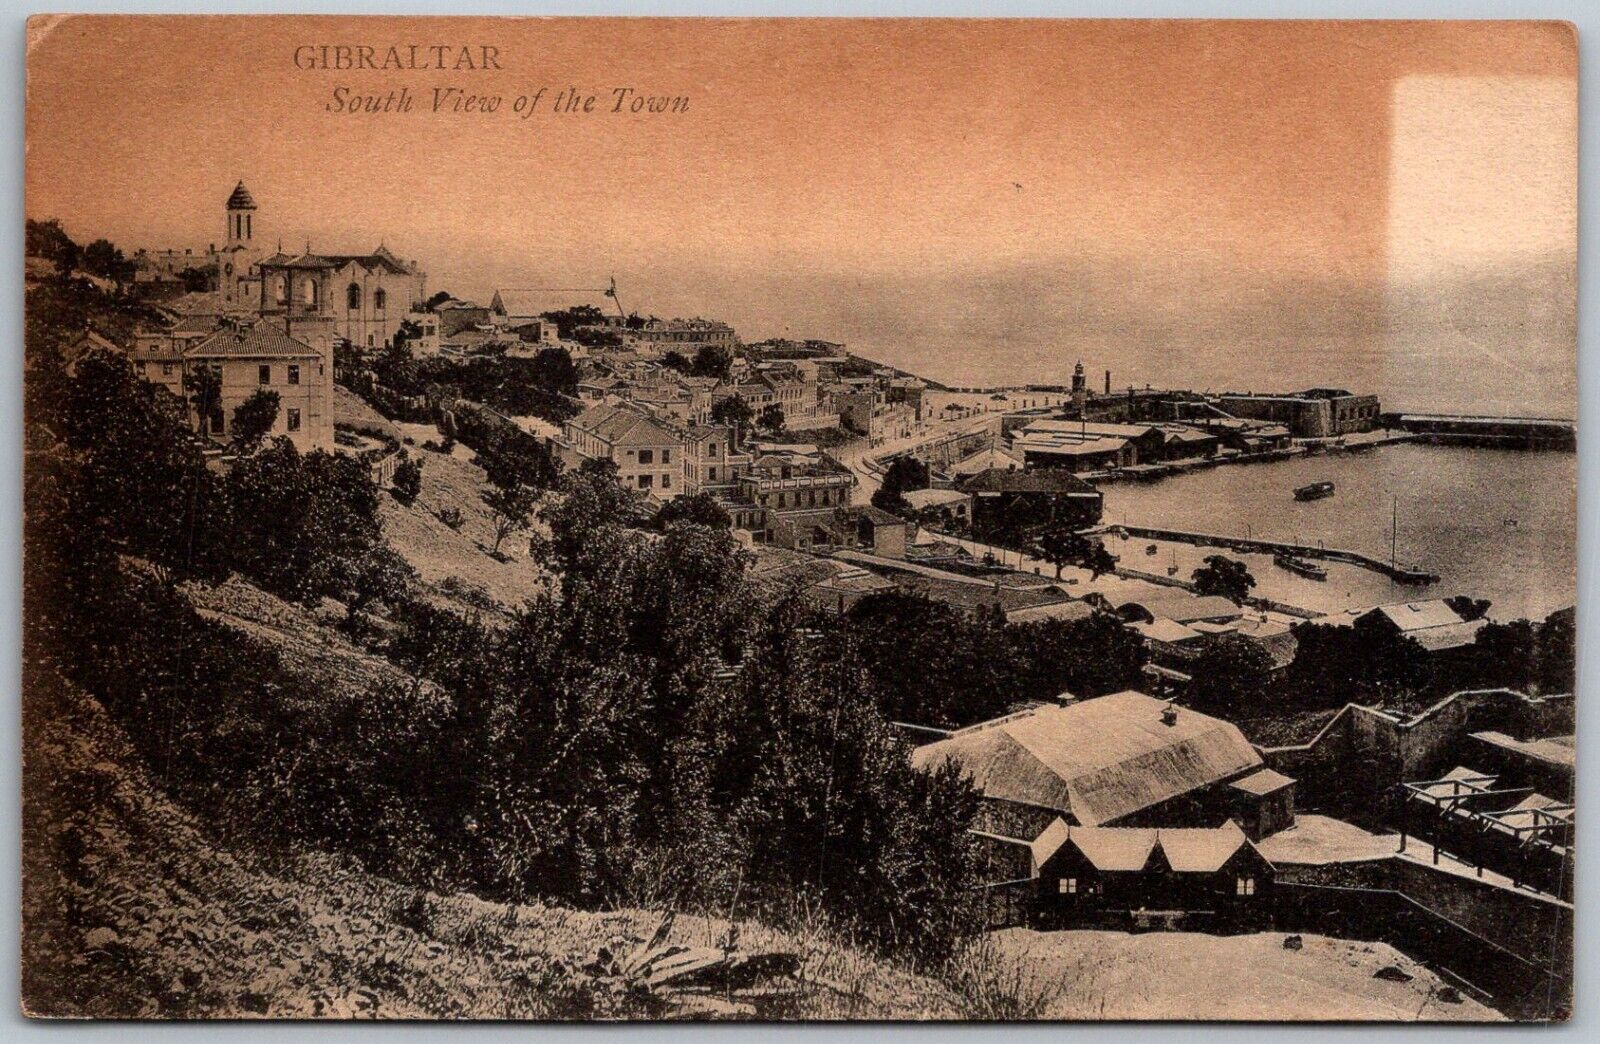 GIBRALTAR c1910 Postcard South View Of Town